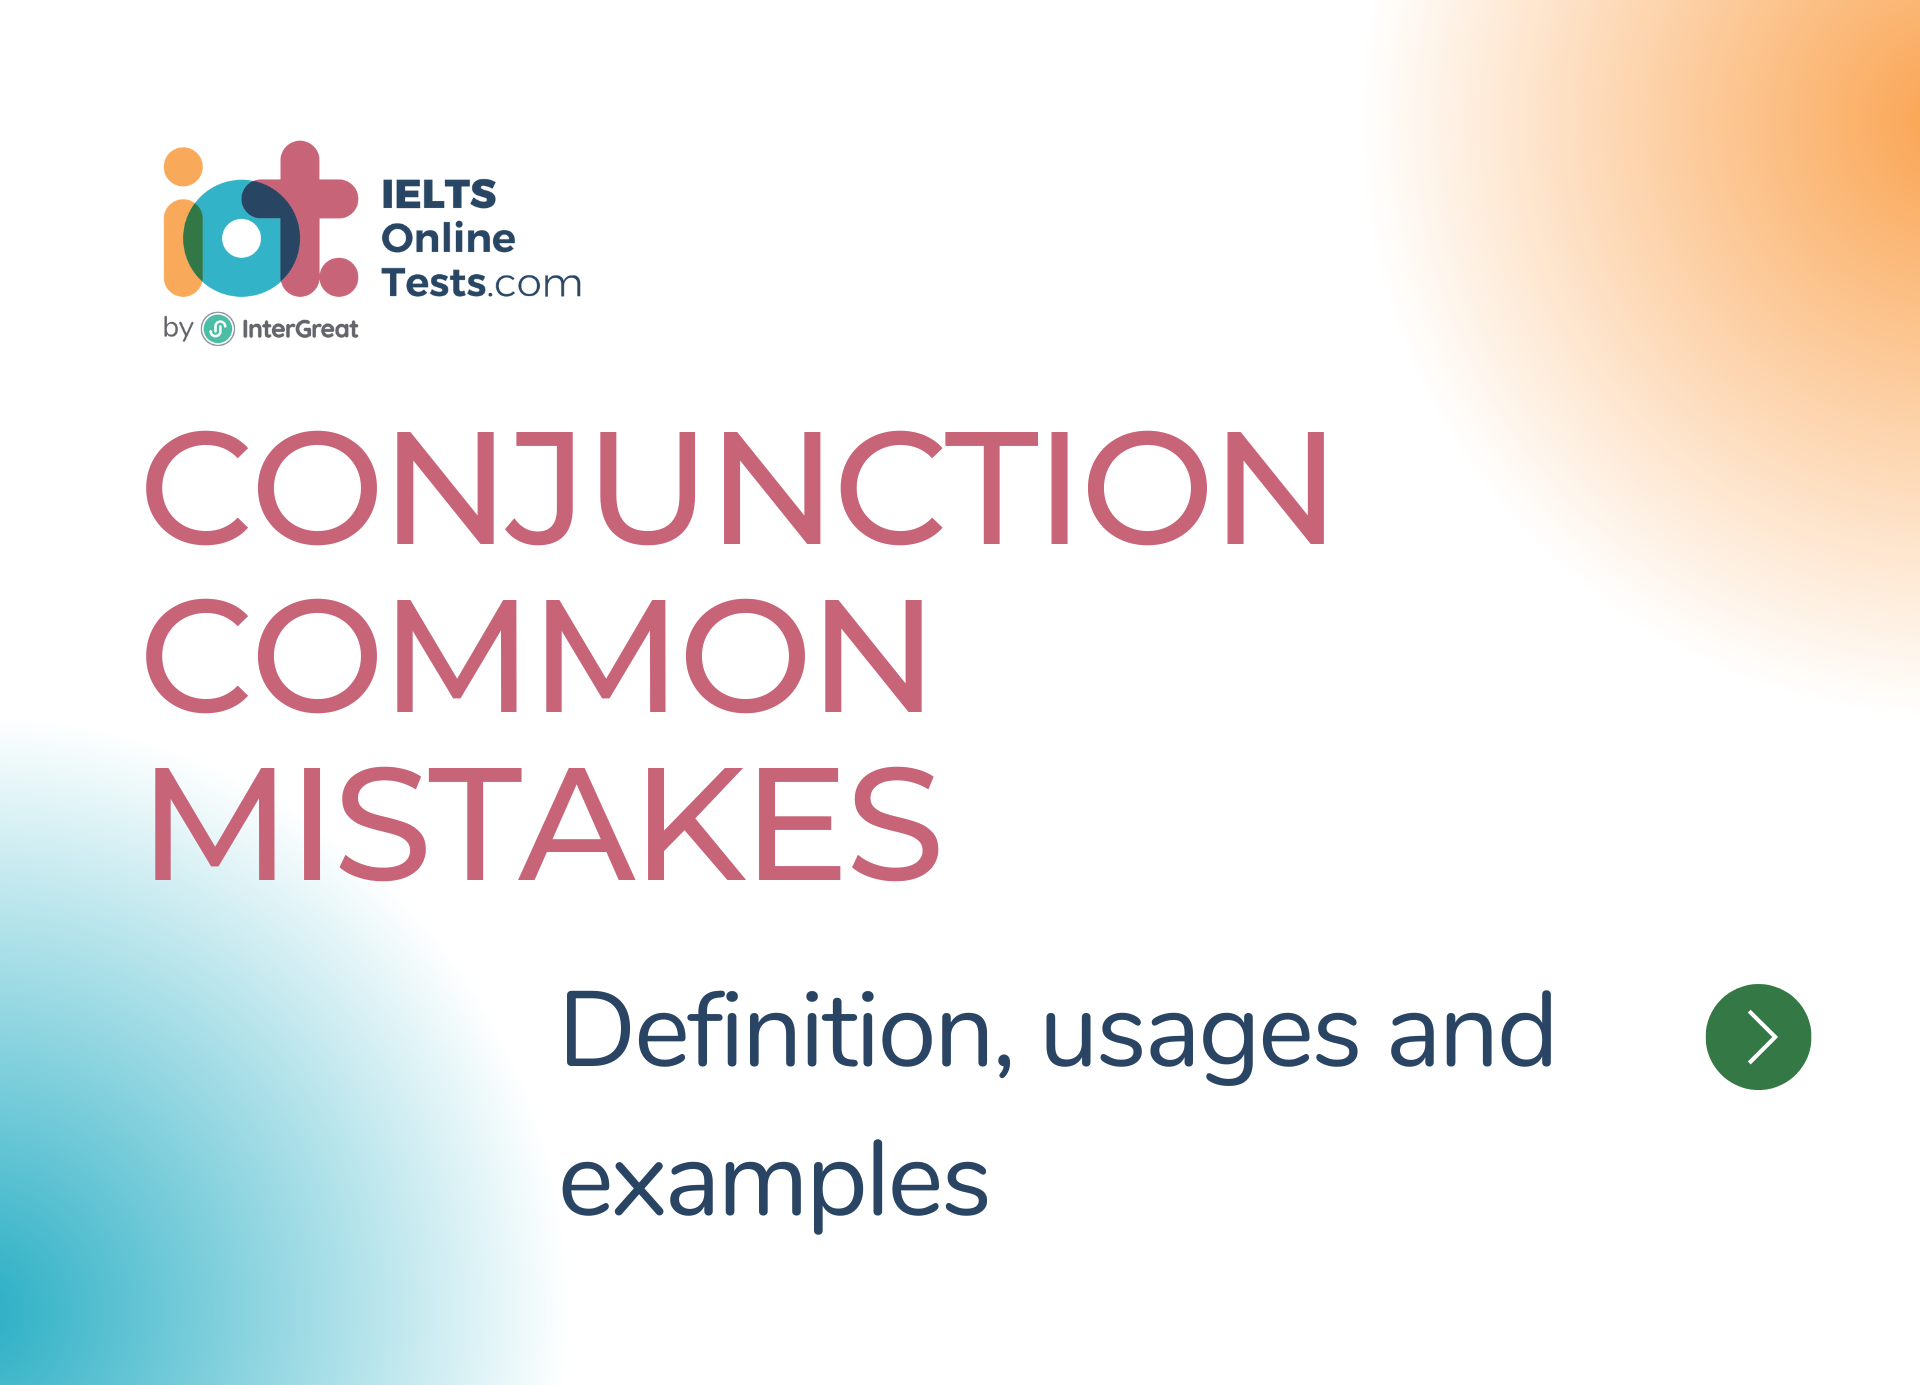 Conjunction common mistakes